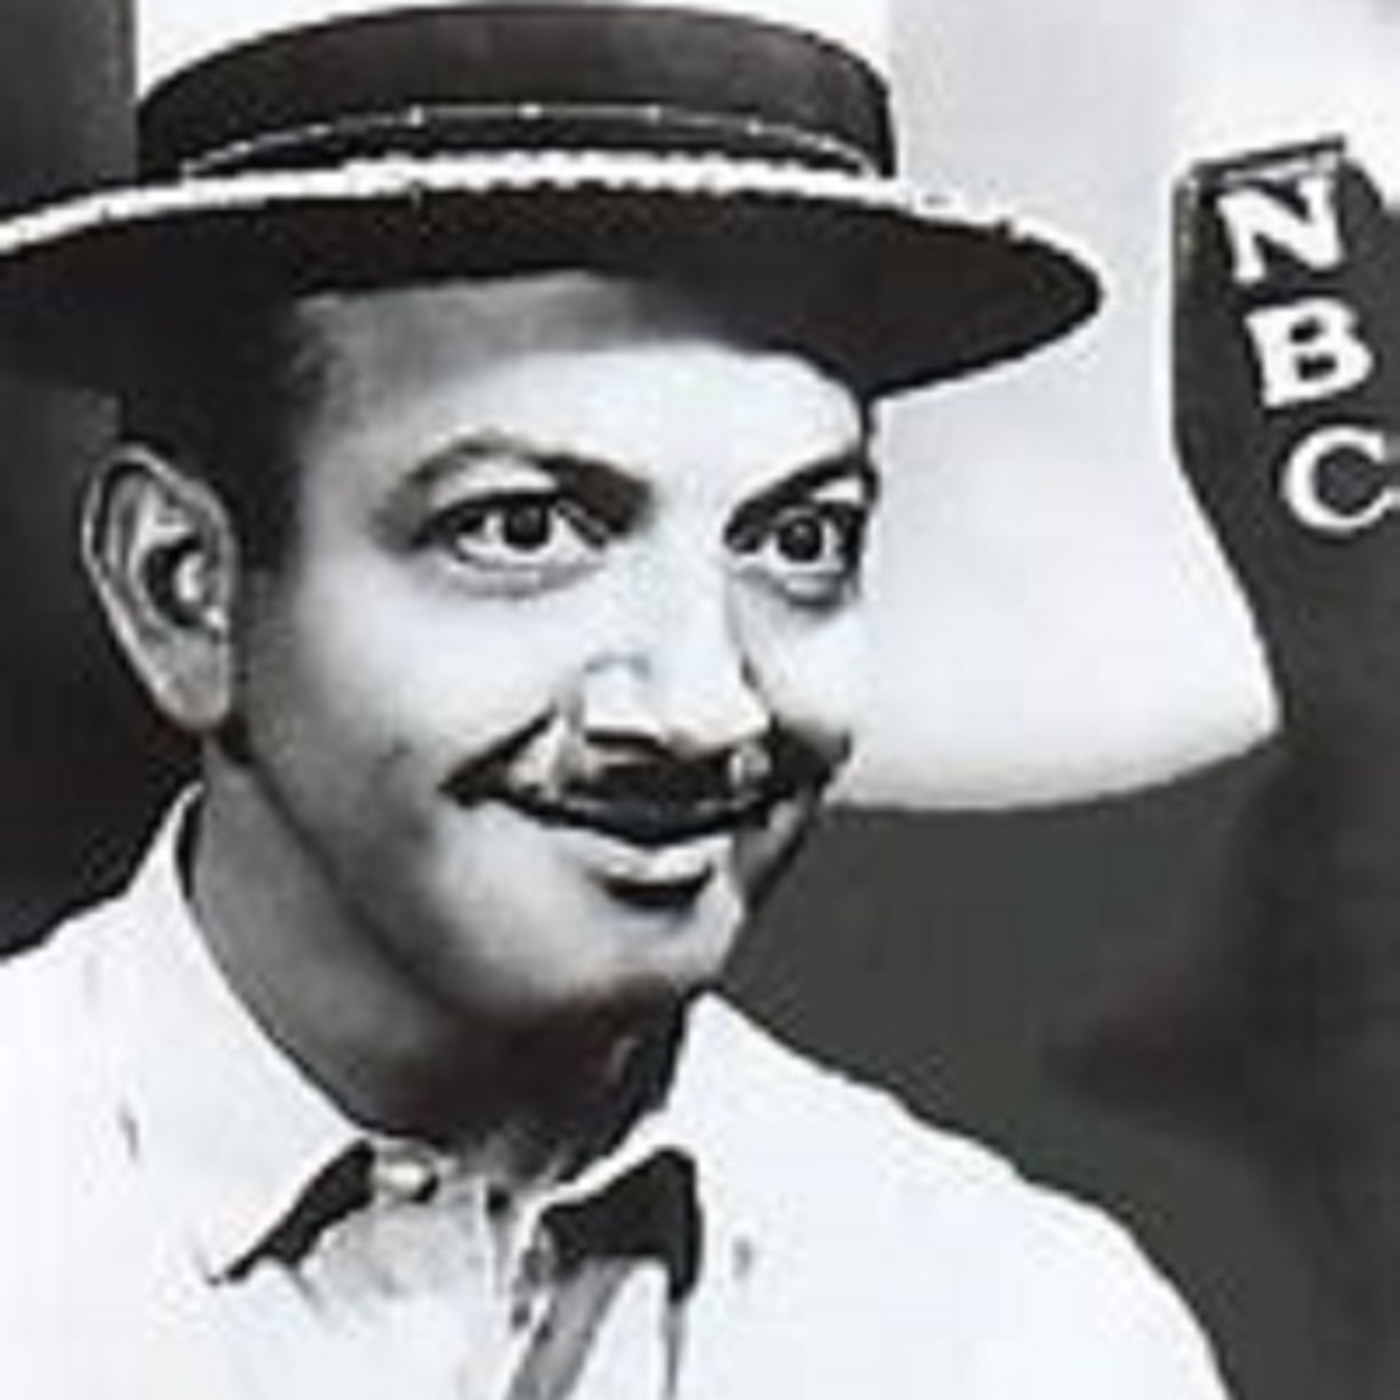 The Mel Blanc Show - Sally and Marylou - 100846, episode 6